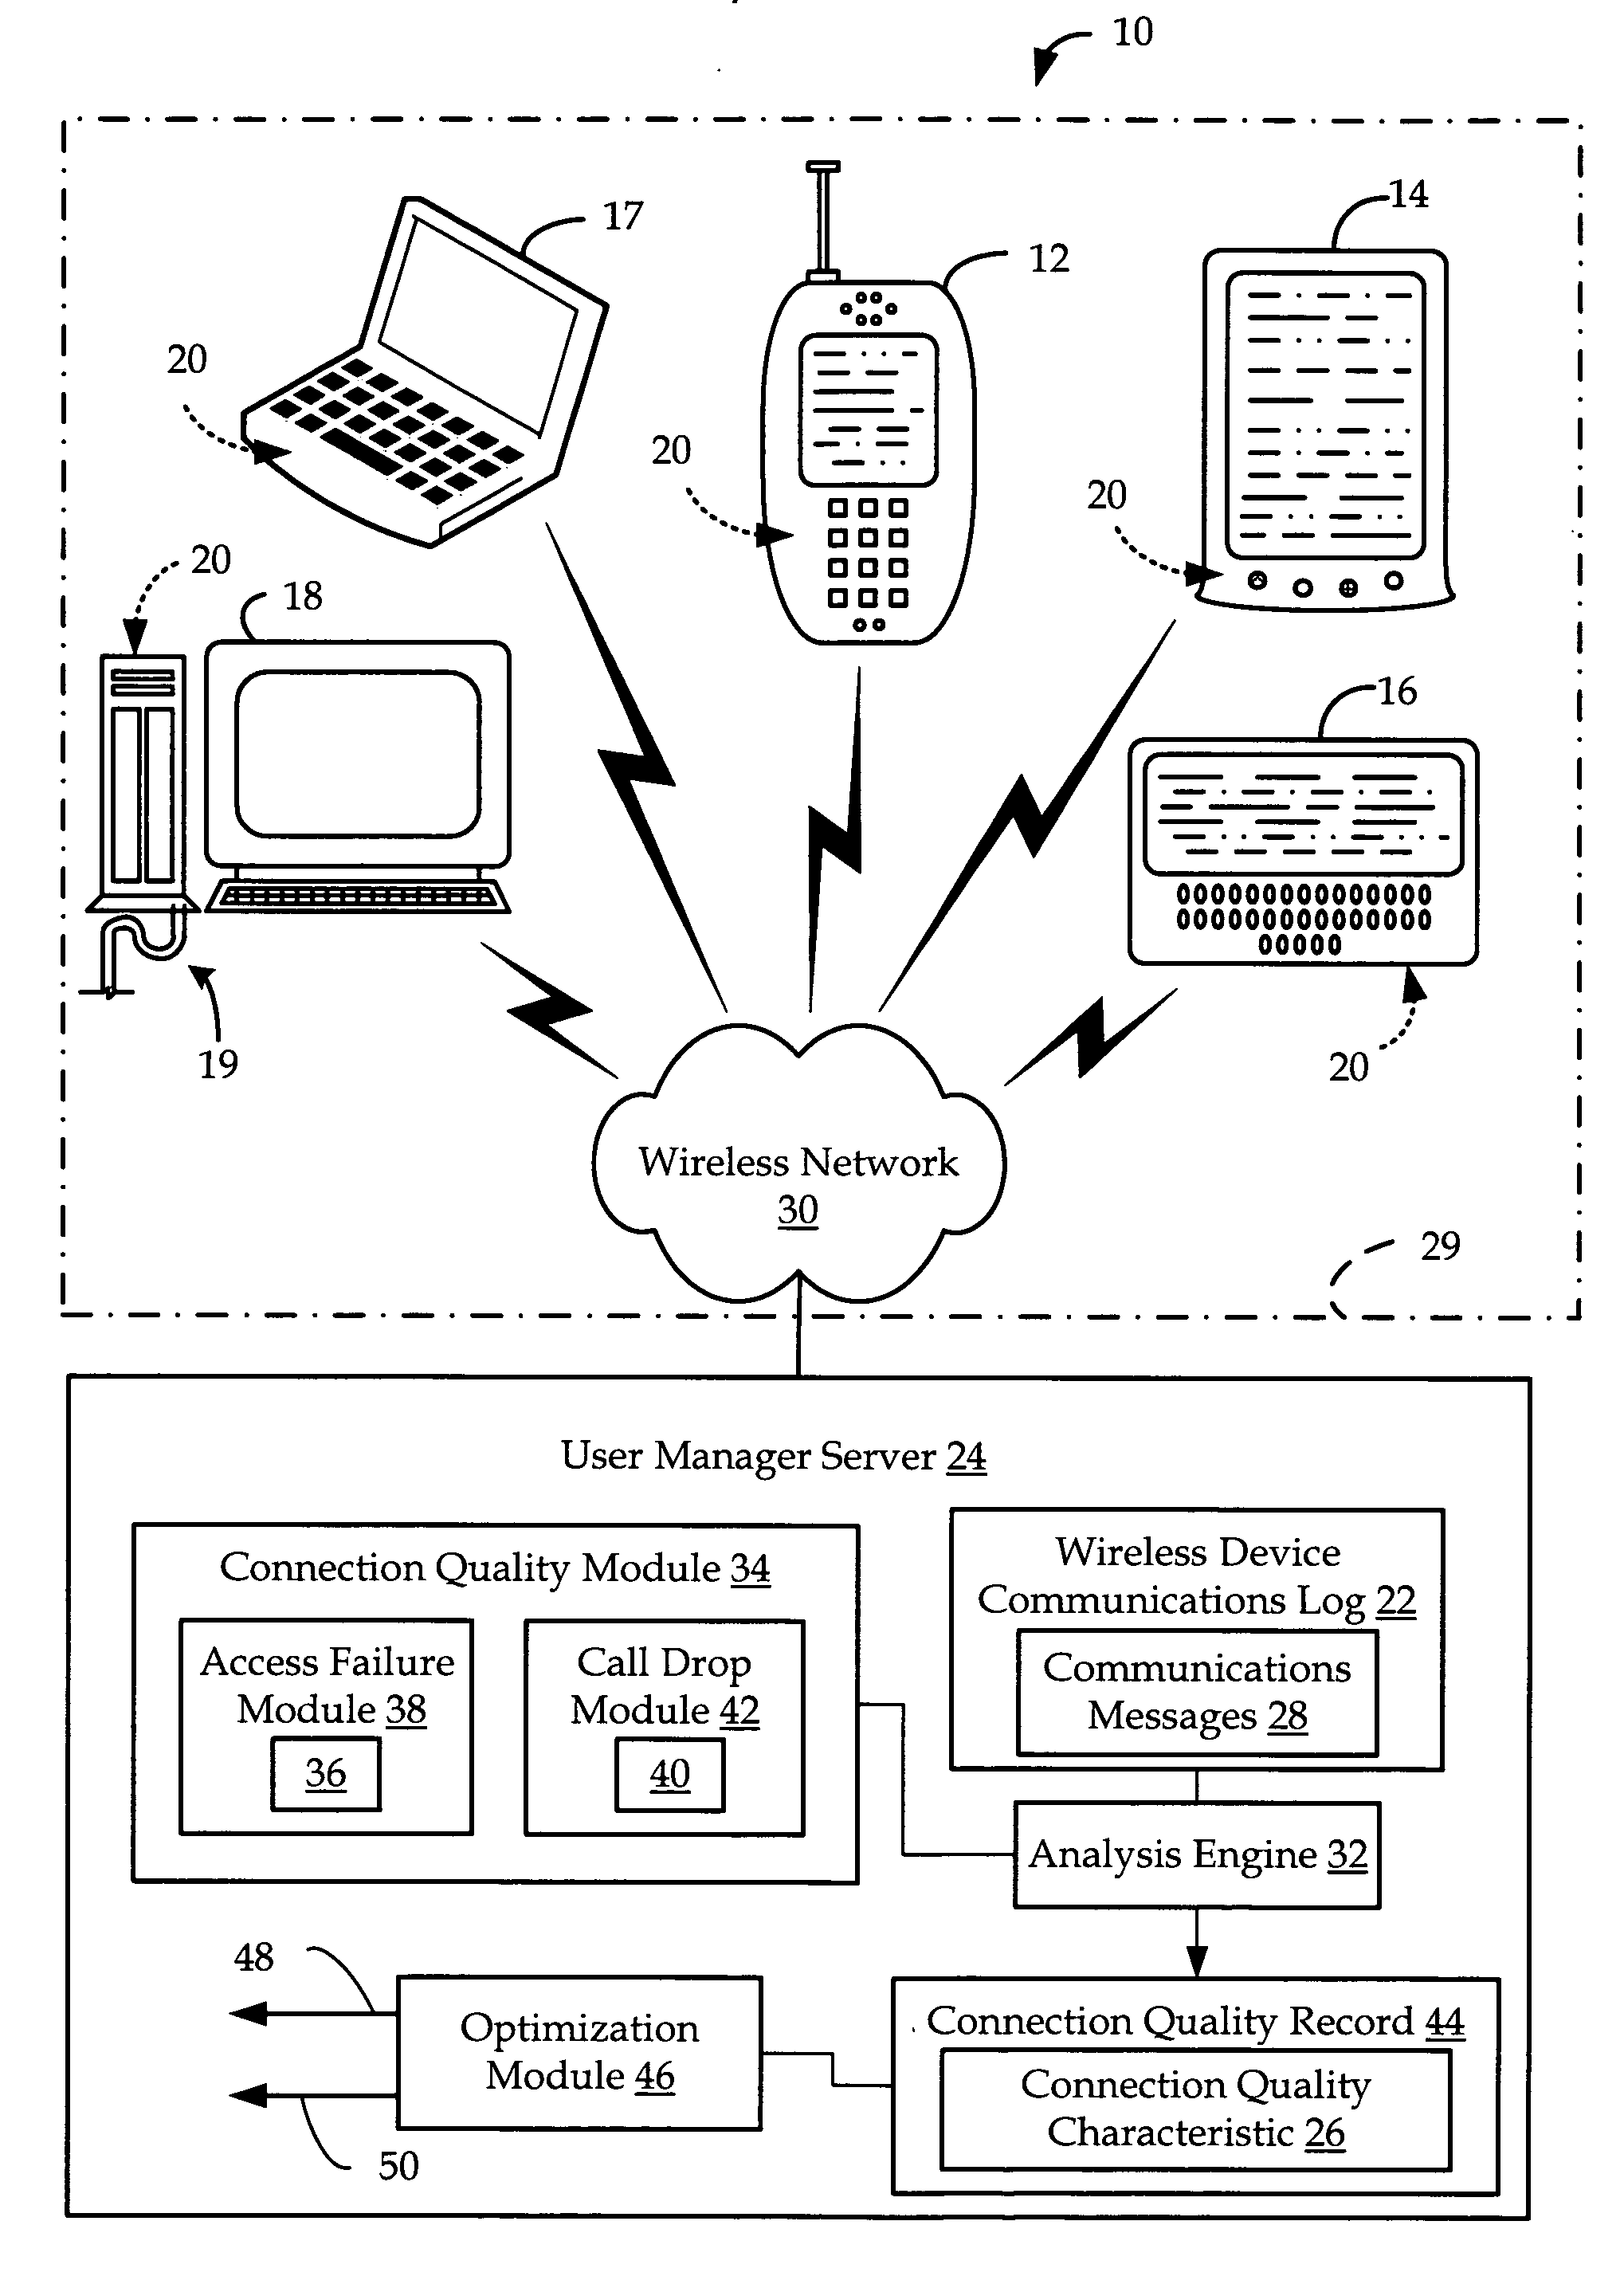 Apparatus and methods for determining connection quality of a wireless device on a wireless communications network